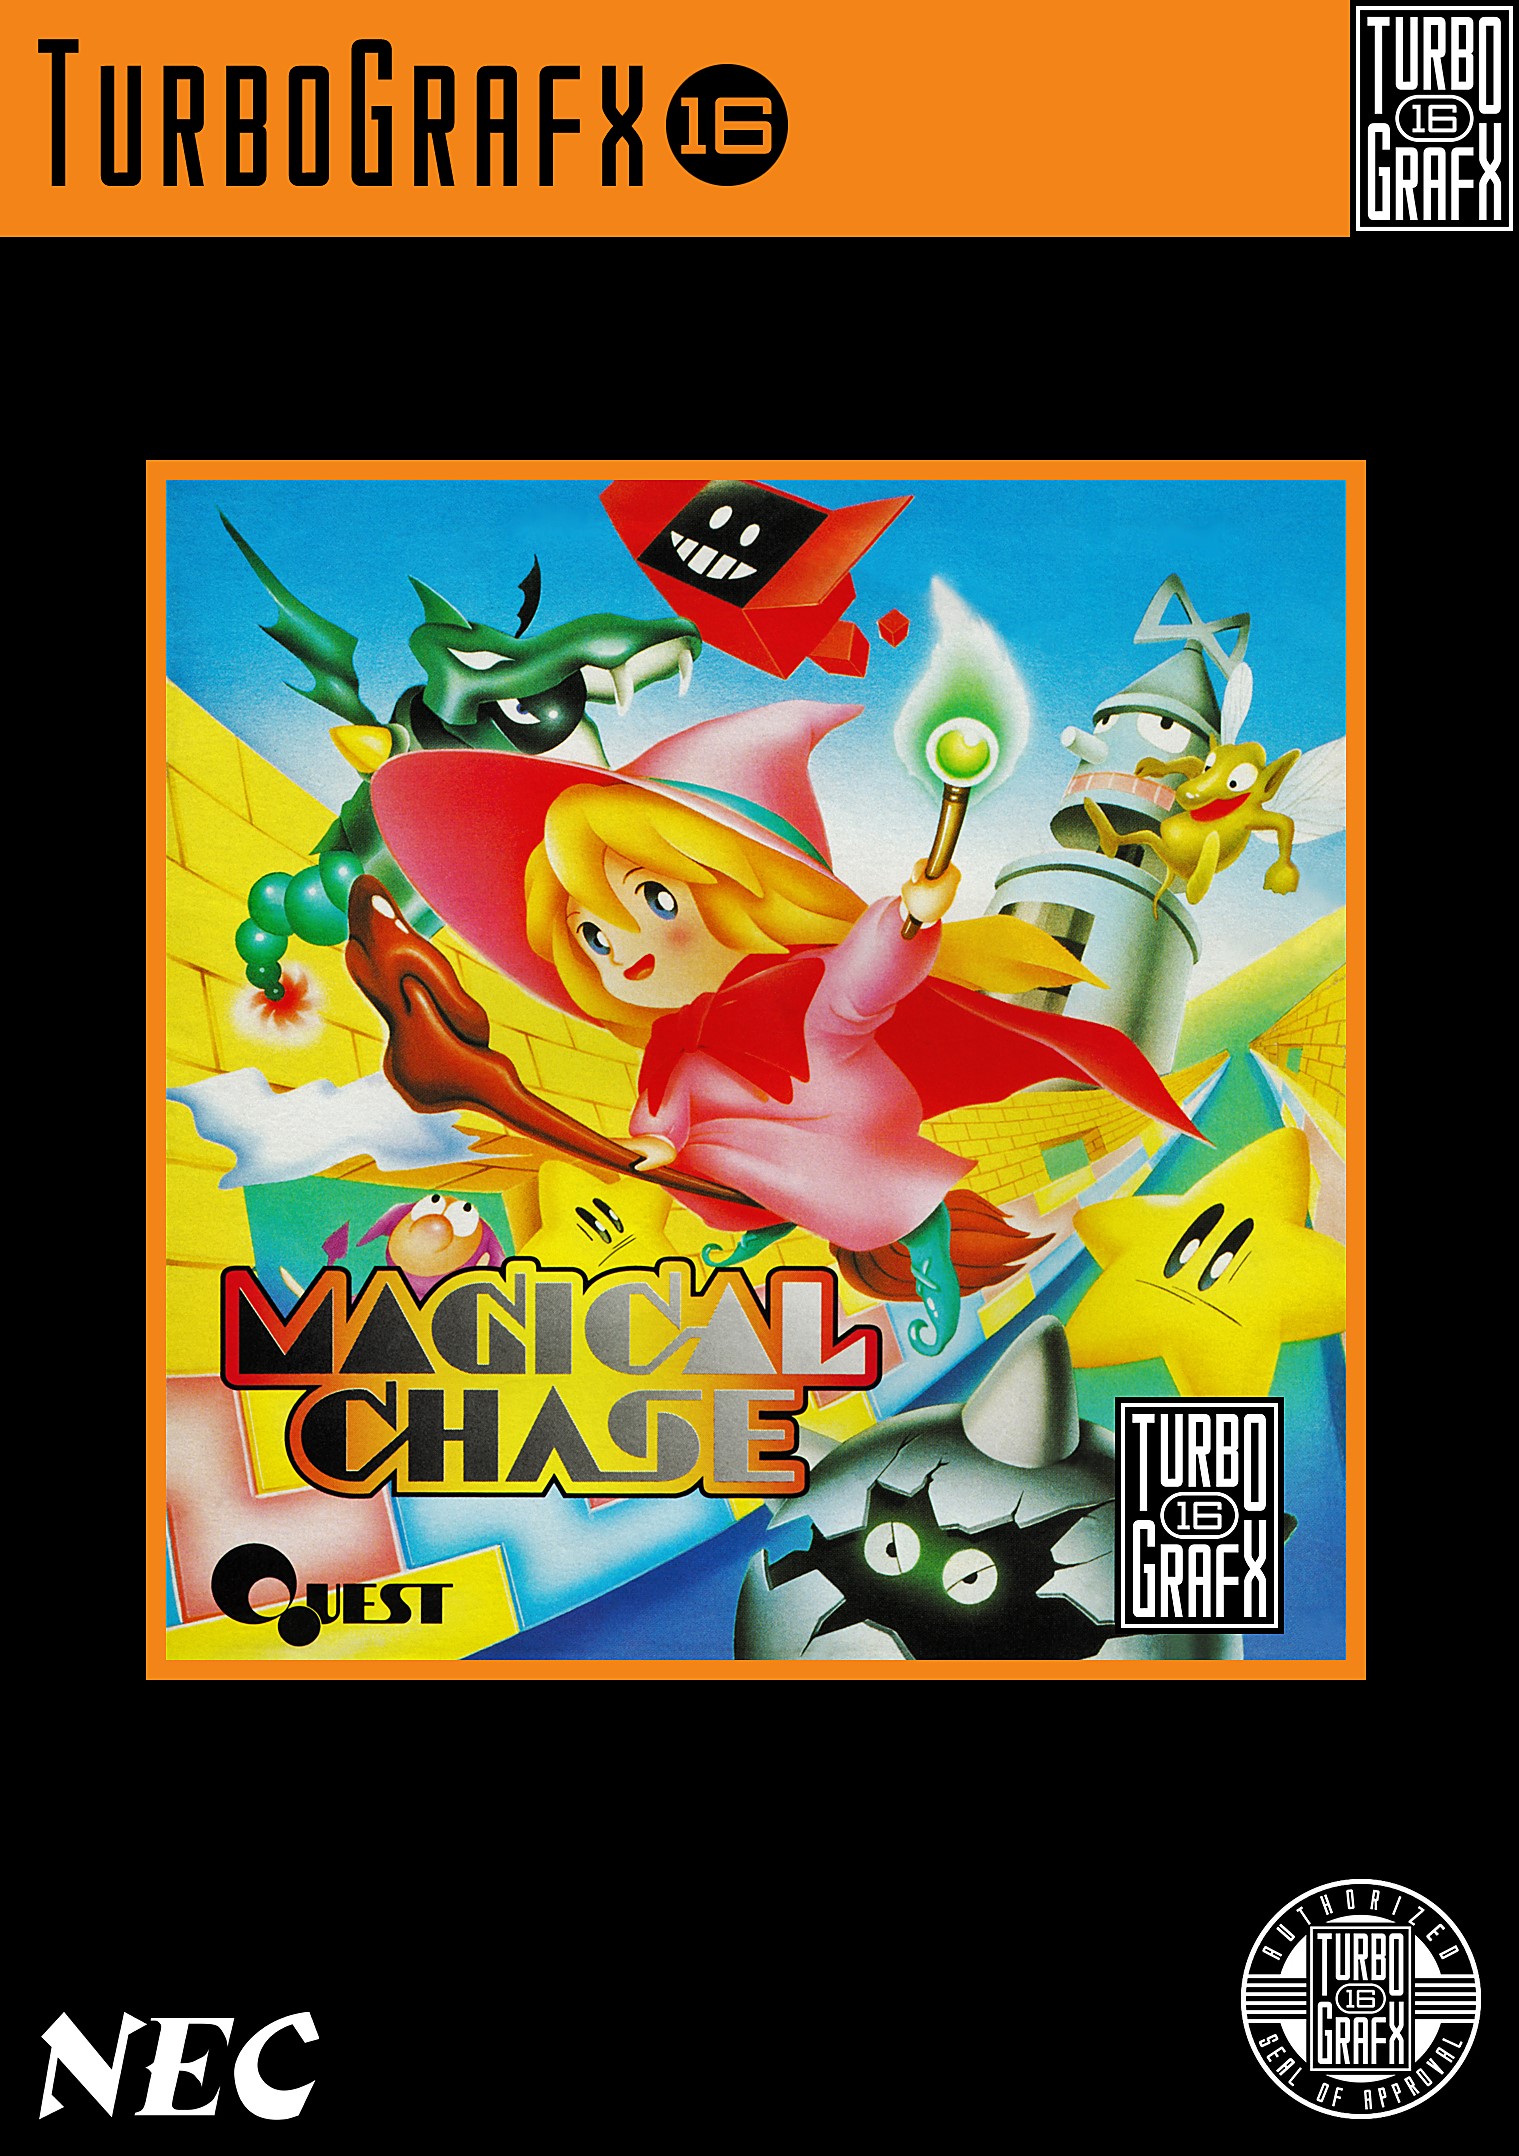 'Magical Chase'